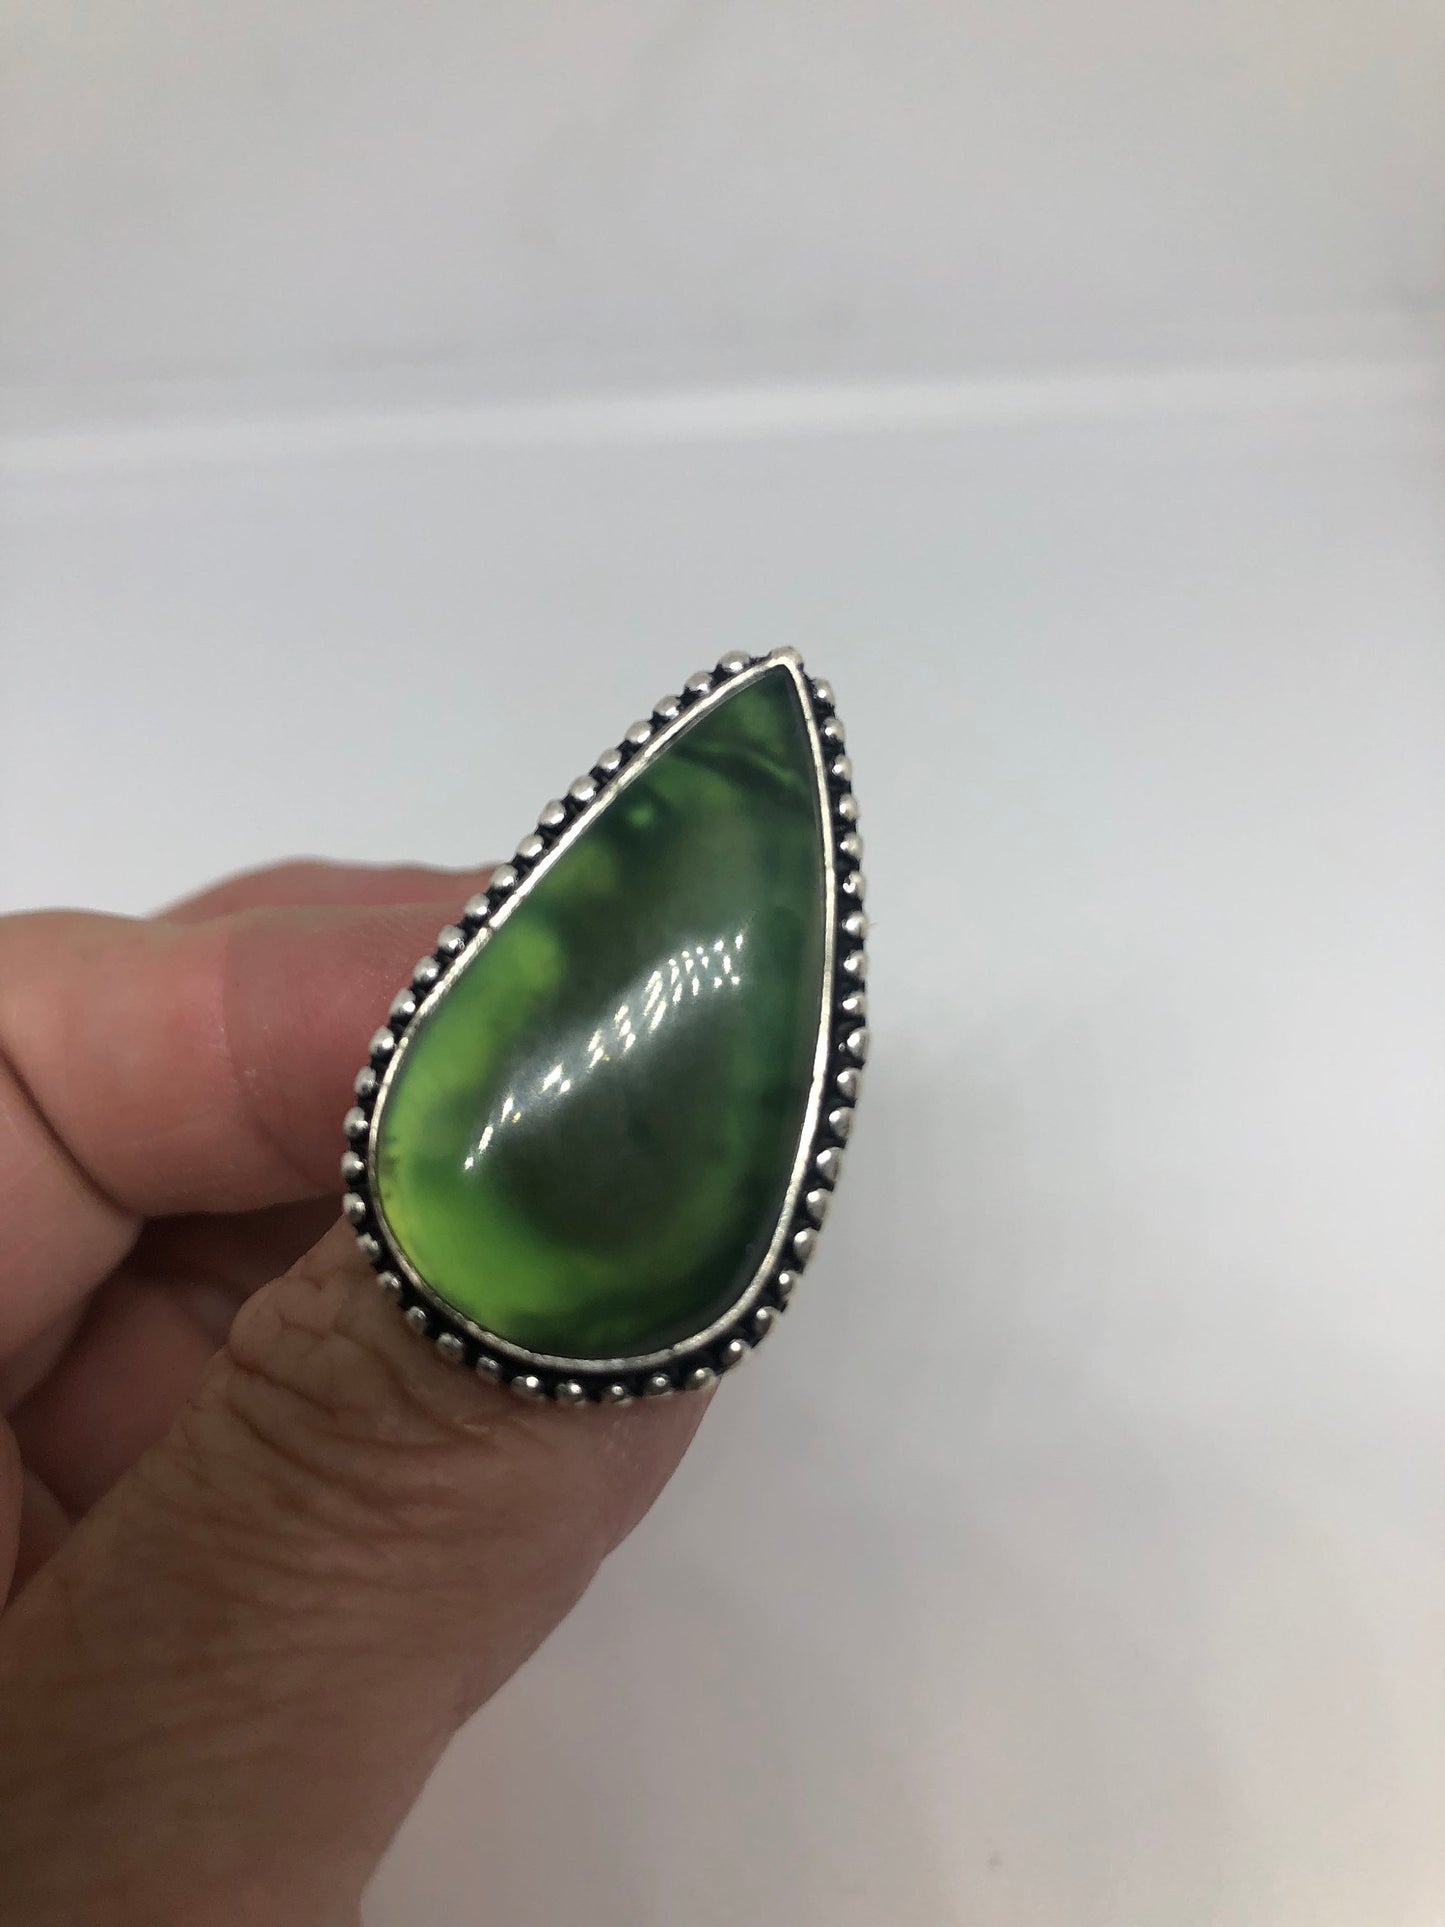 Vintage Green Nephrite Jade Ring About an Inch Long Knuckle Ring